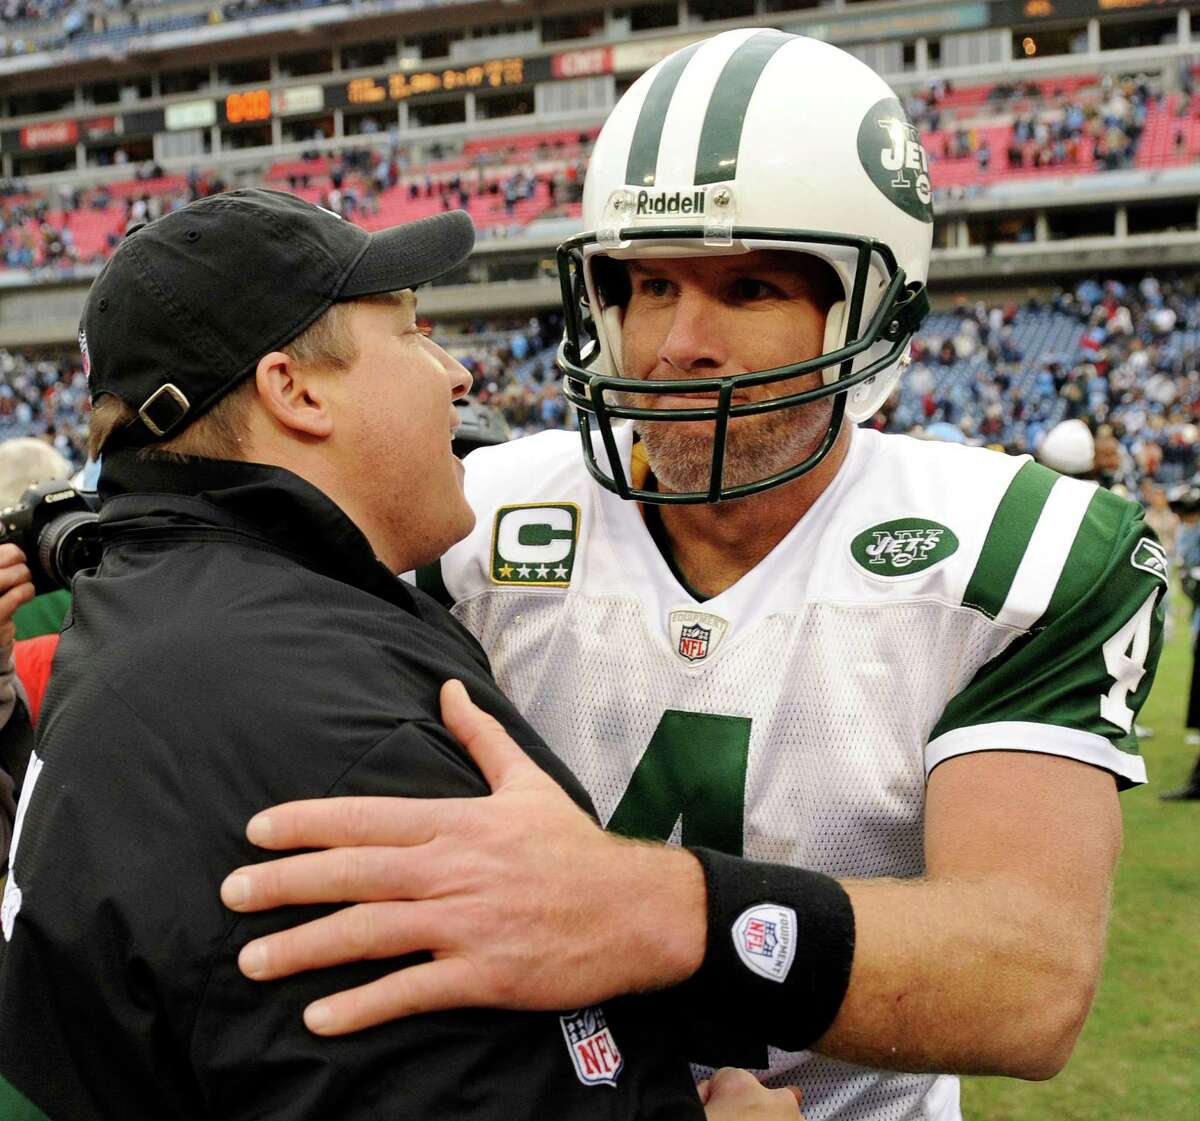 New York Jets coach Eric Mangini congratulates quarterback Brett Favre after the Jets beat the previously undefeated Tennessee Titans 34-13 in an NFL football game in Nashville, Tenn., Sunday, Nov. 23, 2008. (AP Photo/John Russell)